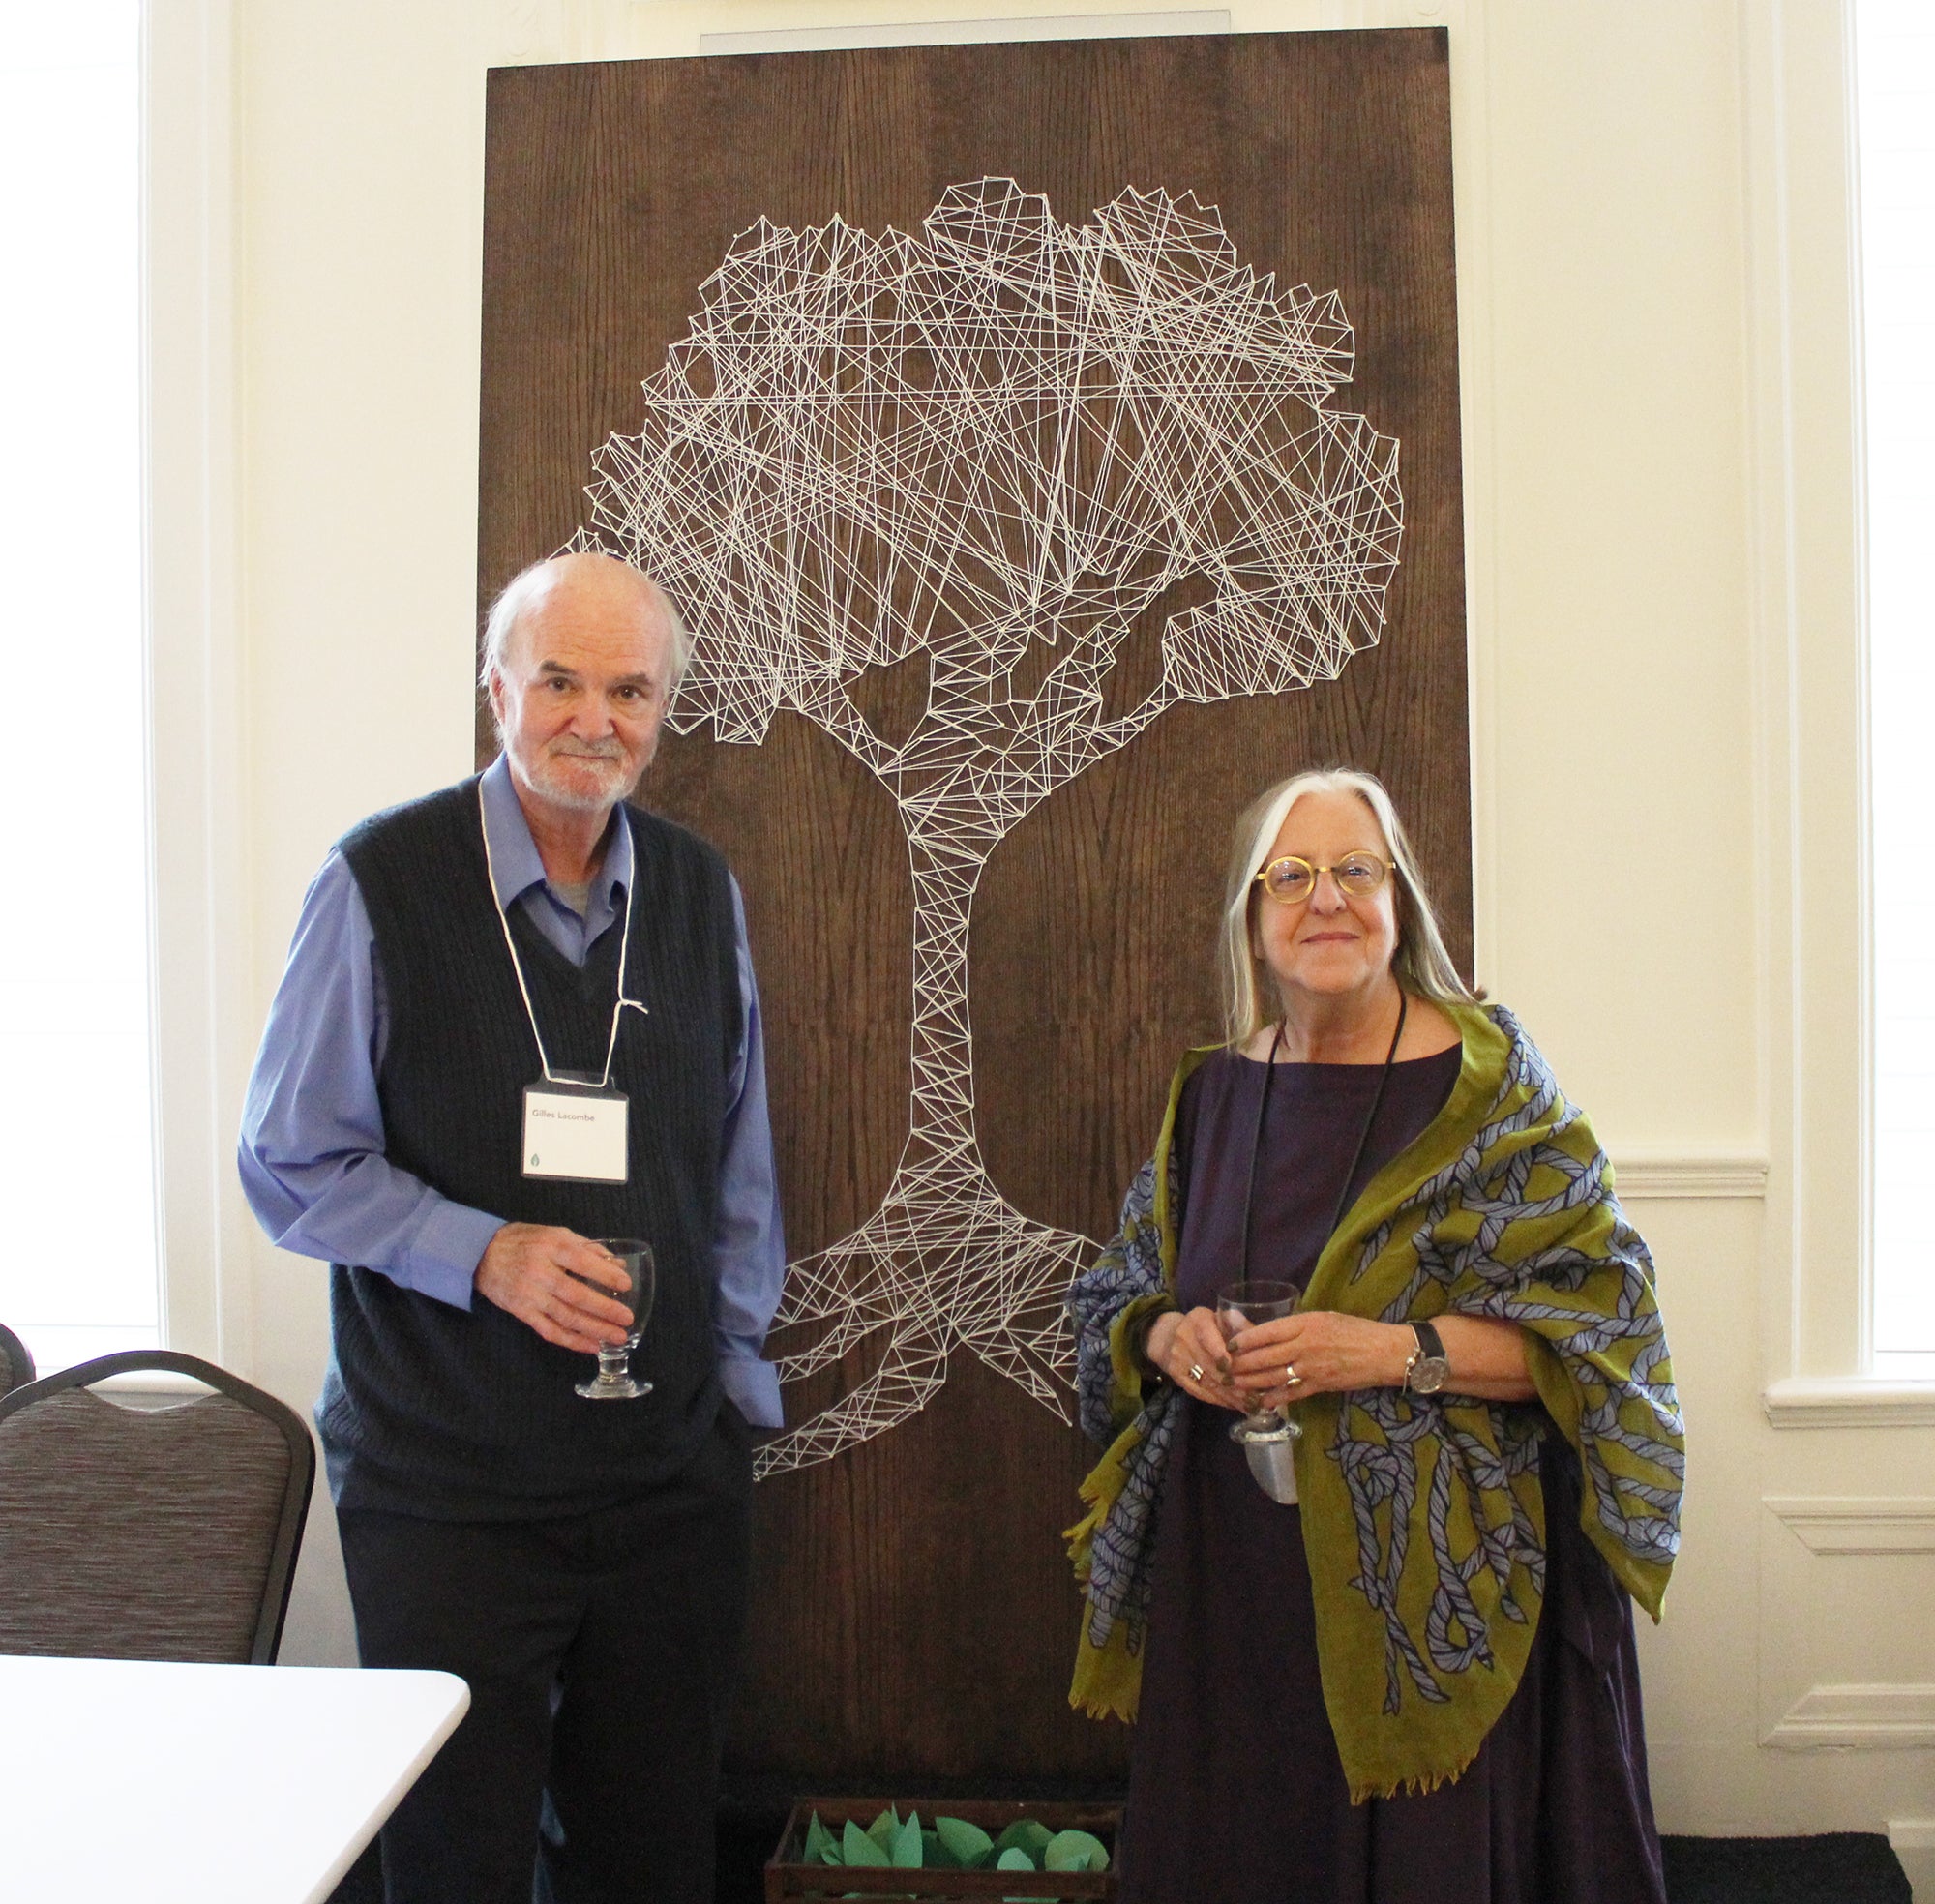 The poets, Andrée Lacelle and Gilles Lacombe at the conference.